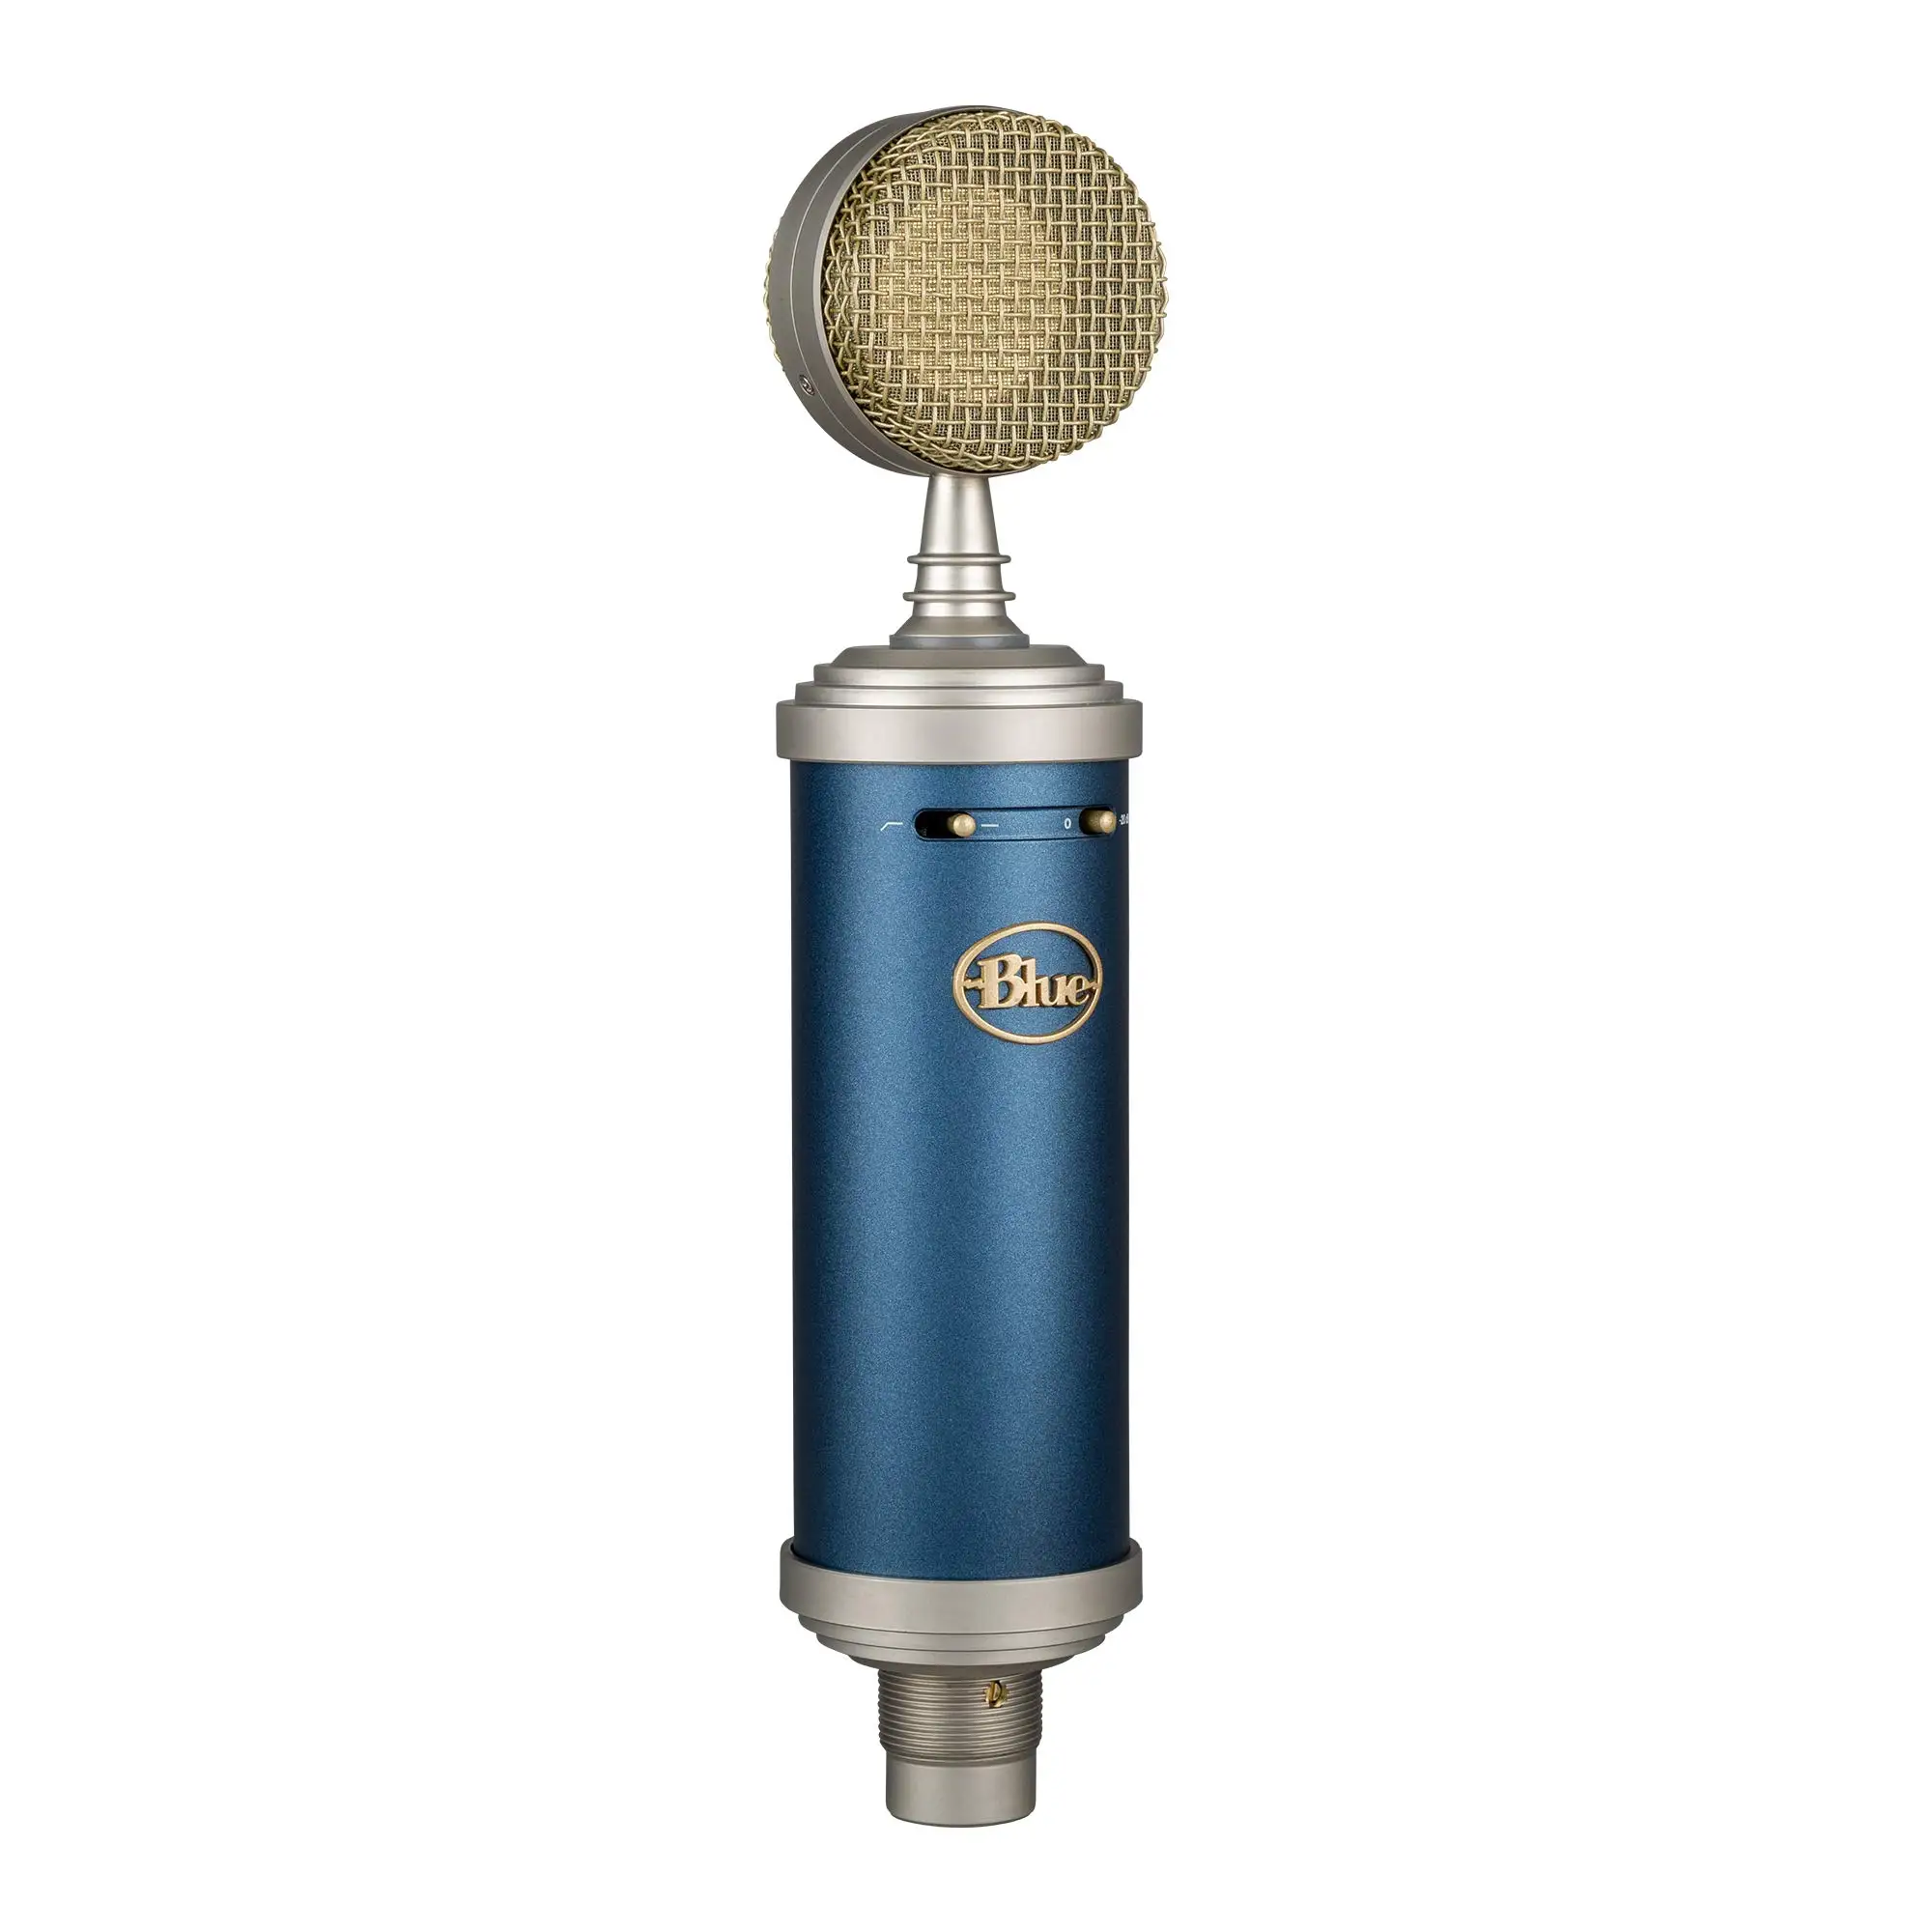 

Blue Bluebird SL Cardioid Condenser Microphone for Pro Recording, Streaming, Podcasting, Gaming, Mic with Large Diaphragm